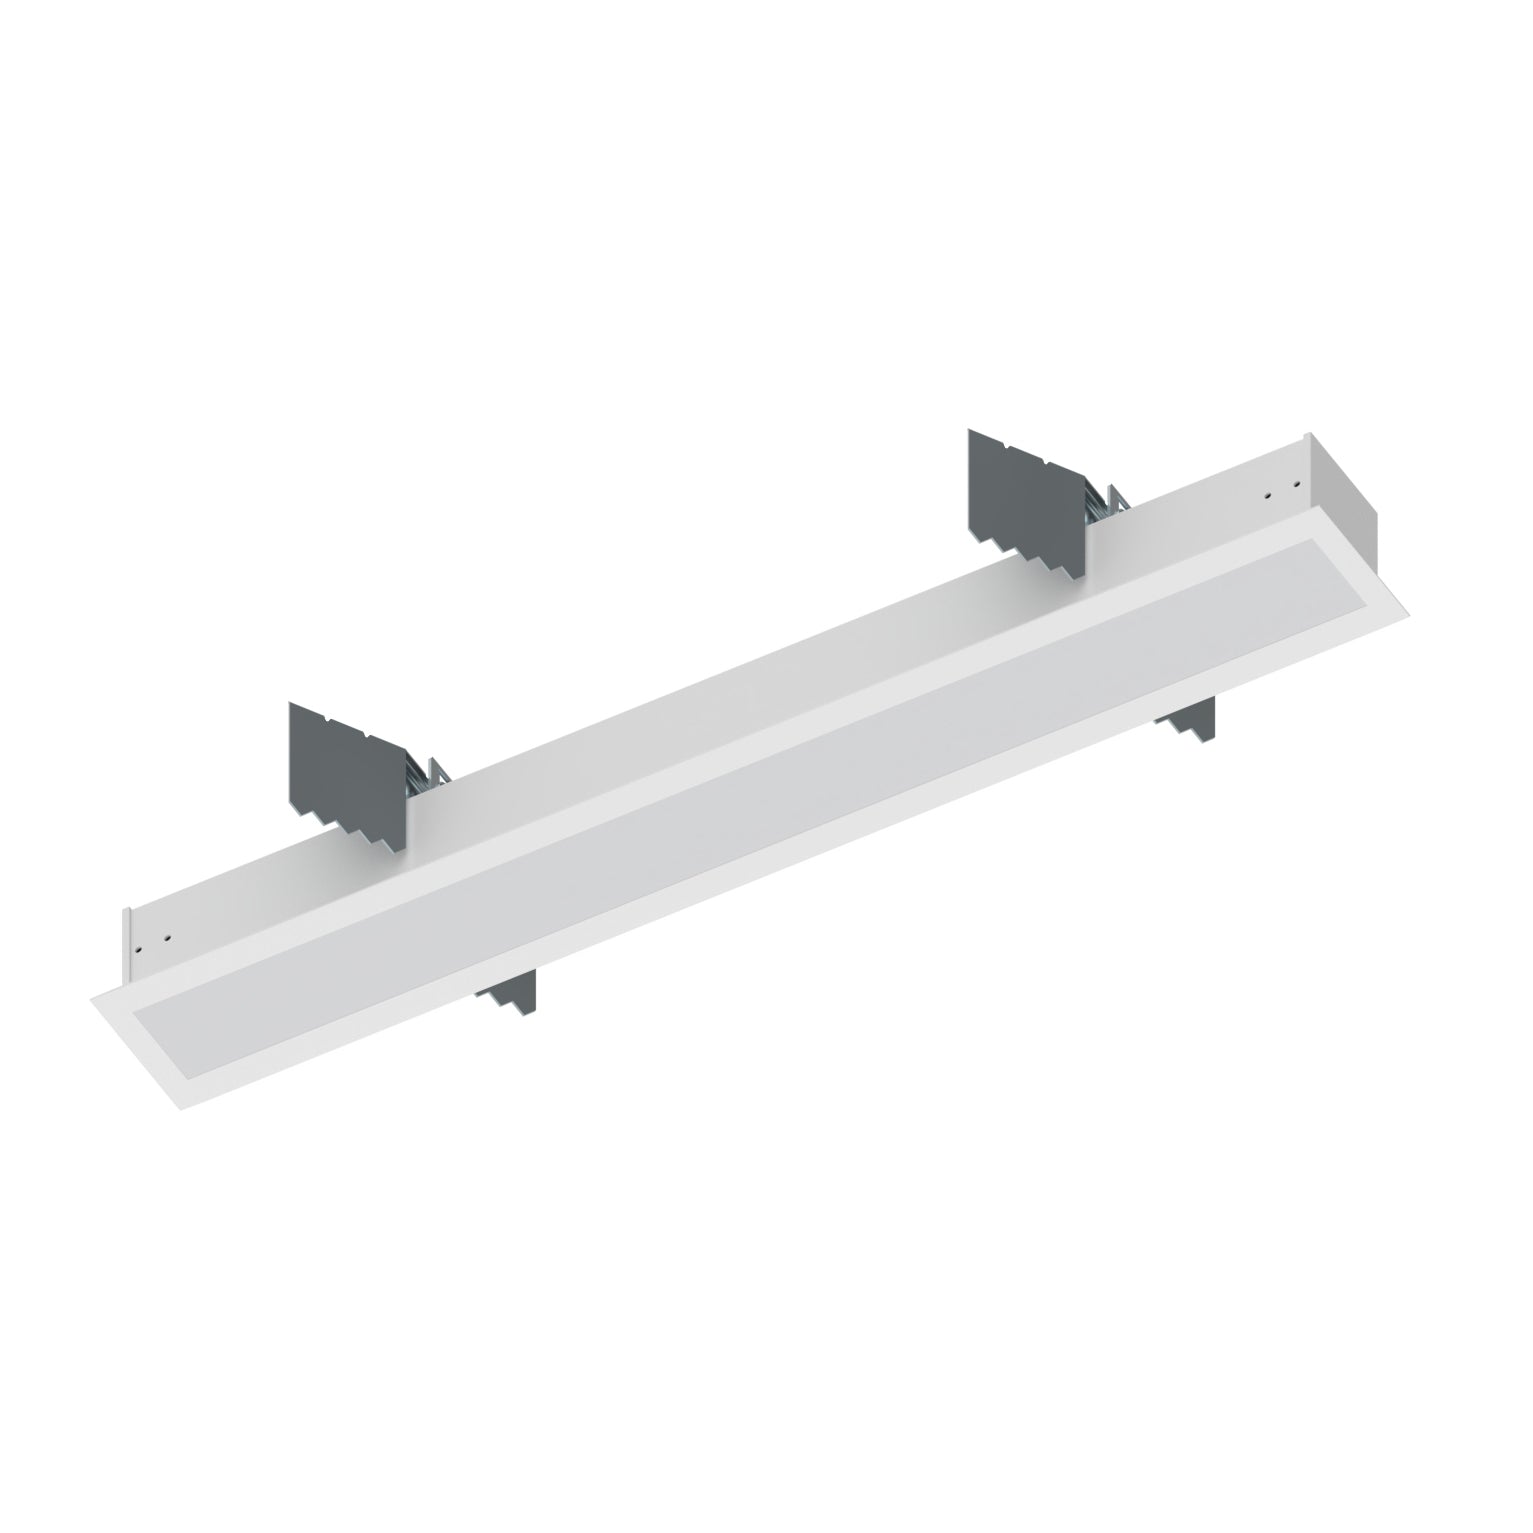 Nora Lighting NRLIN-21030W - Linear - 2' L-Line LED Recessed Linear, 2100lm / 3000K, White Finish